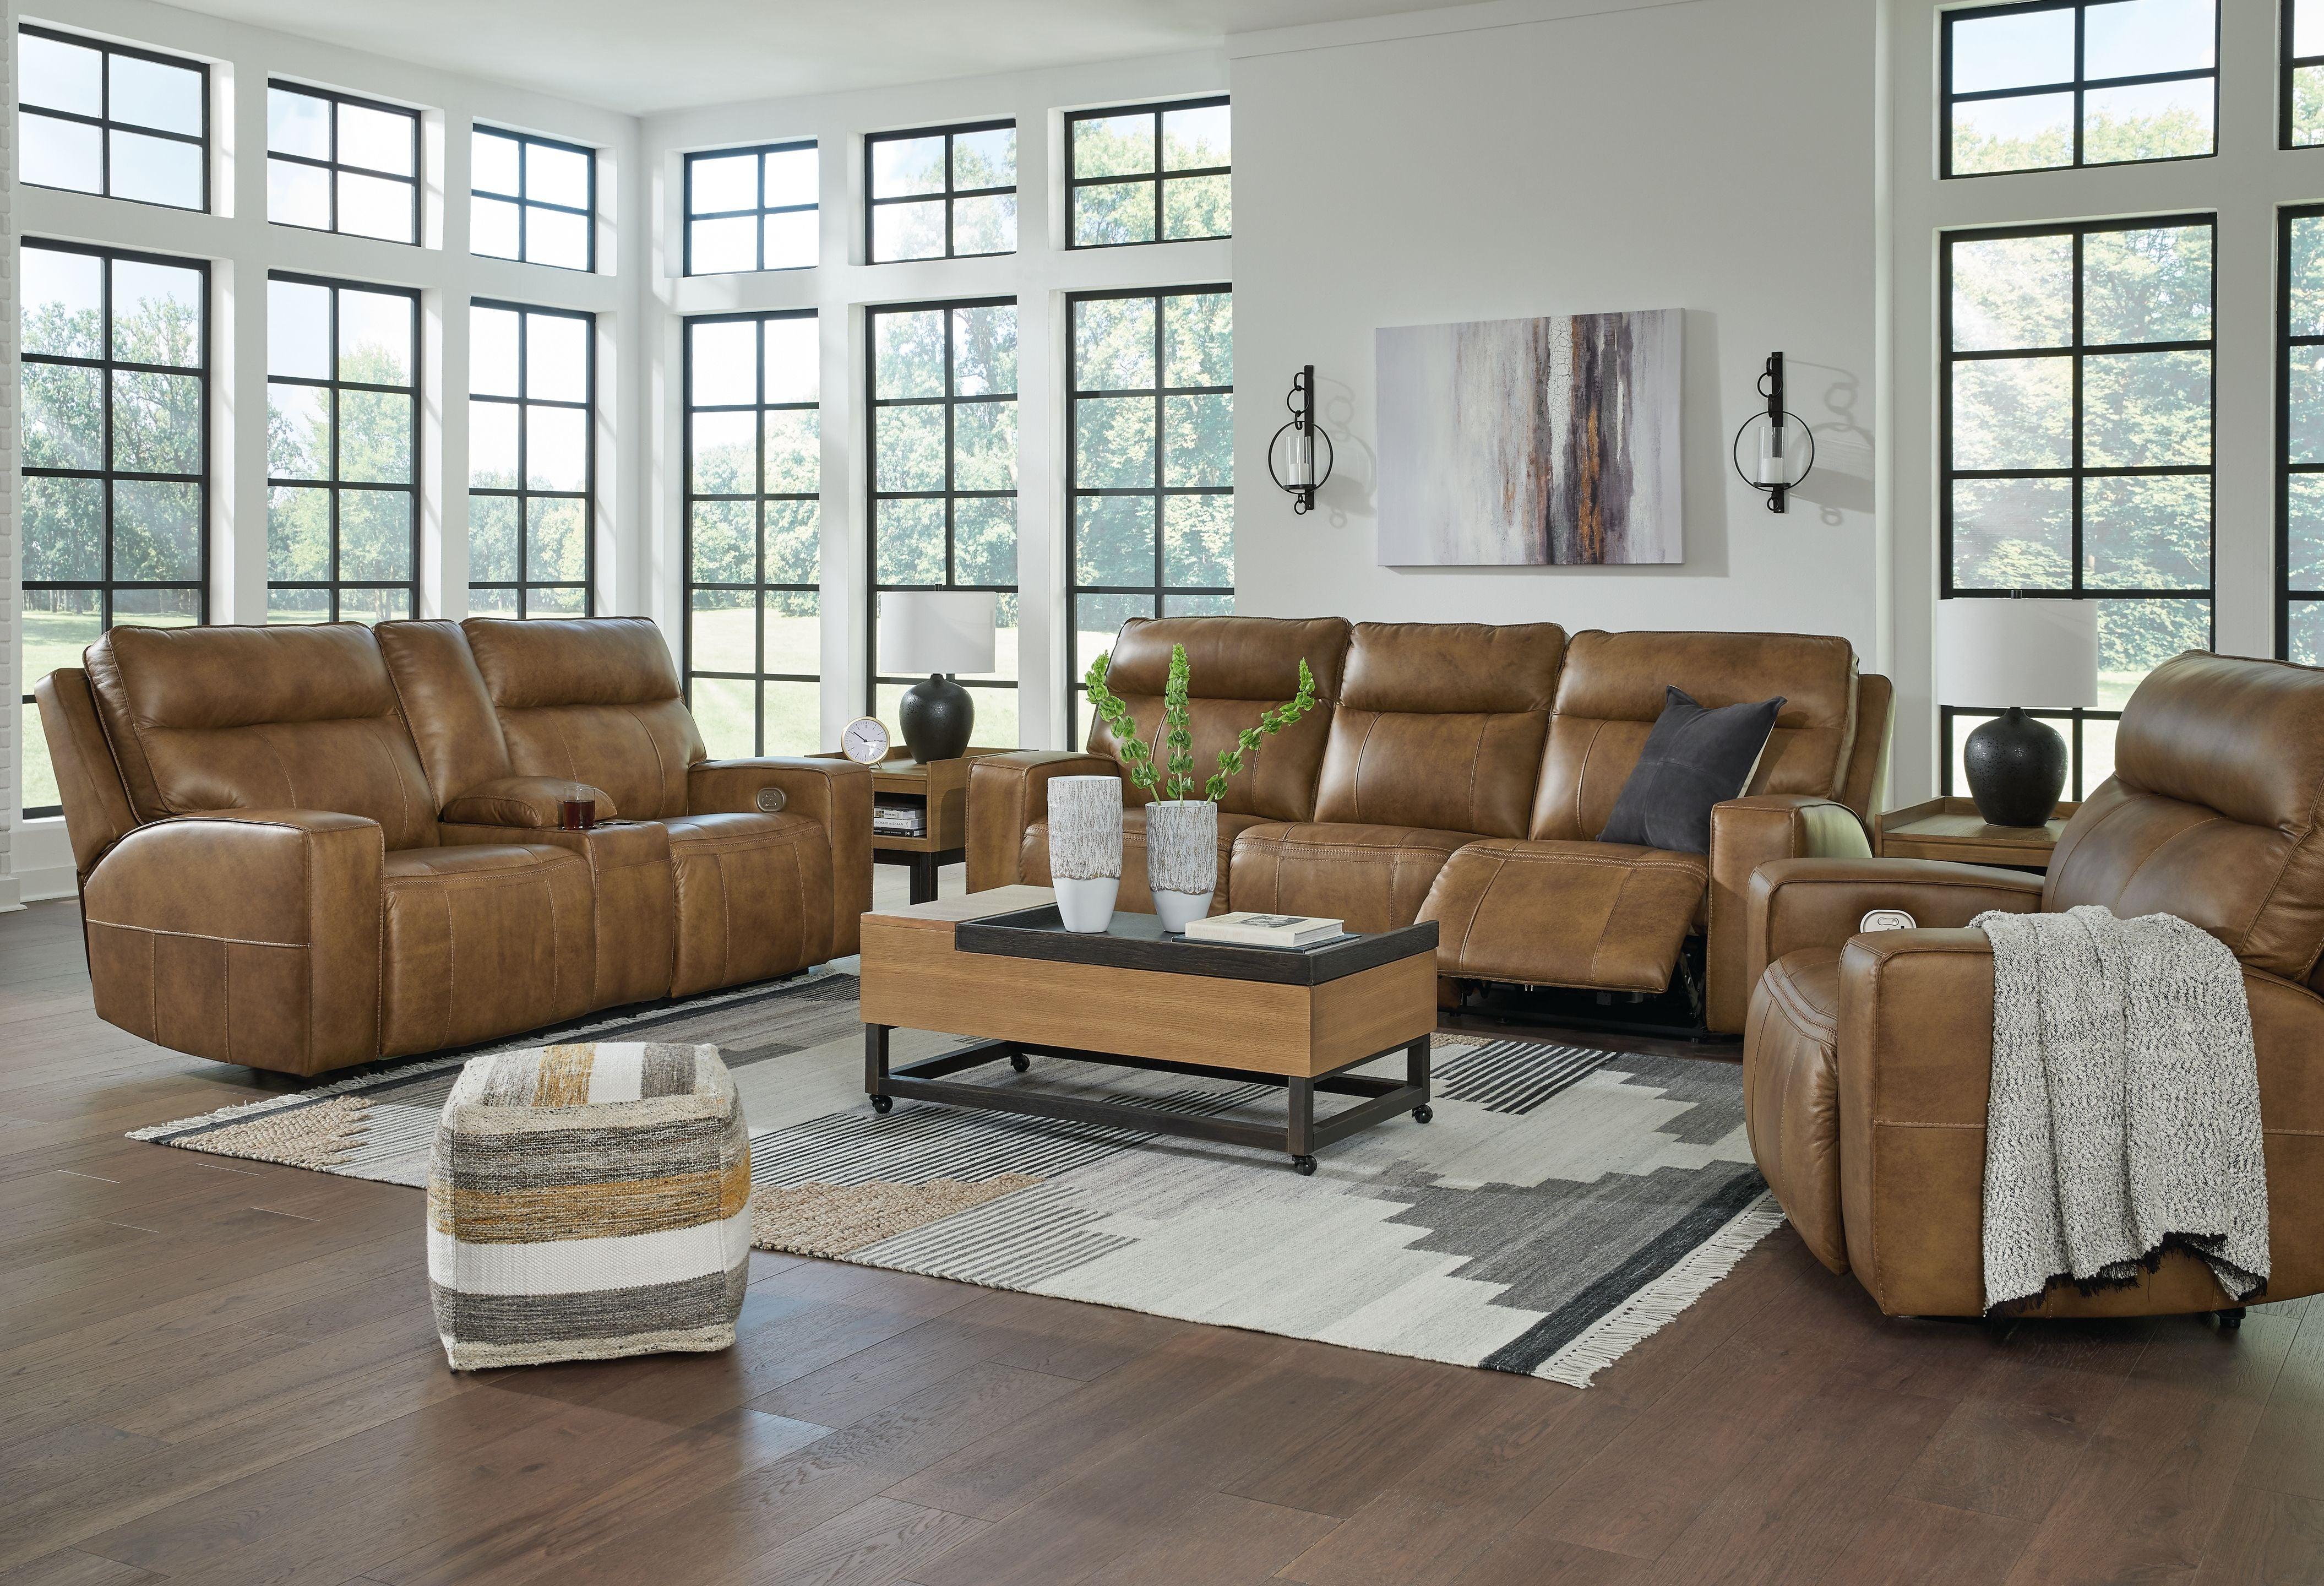 Signature Design by Ashley® - Game Plan - Power Reclining Sofa, Loveseat, Recliner - 5th Avenue Furniture